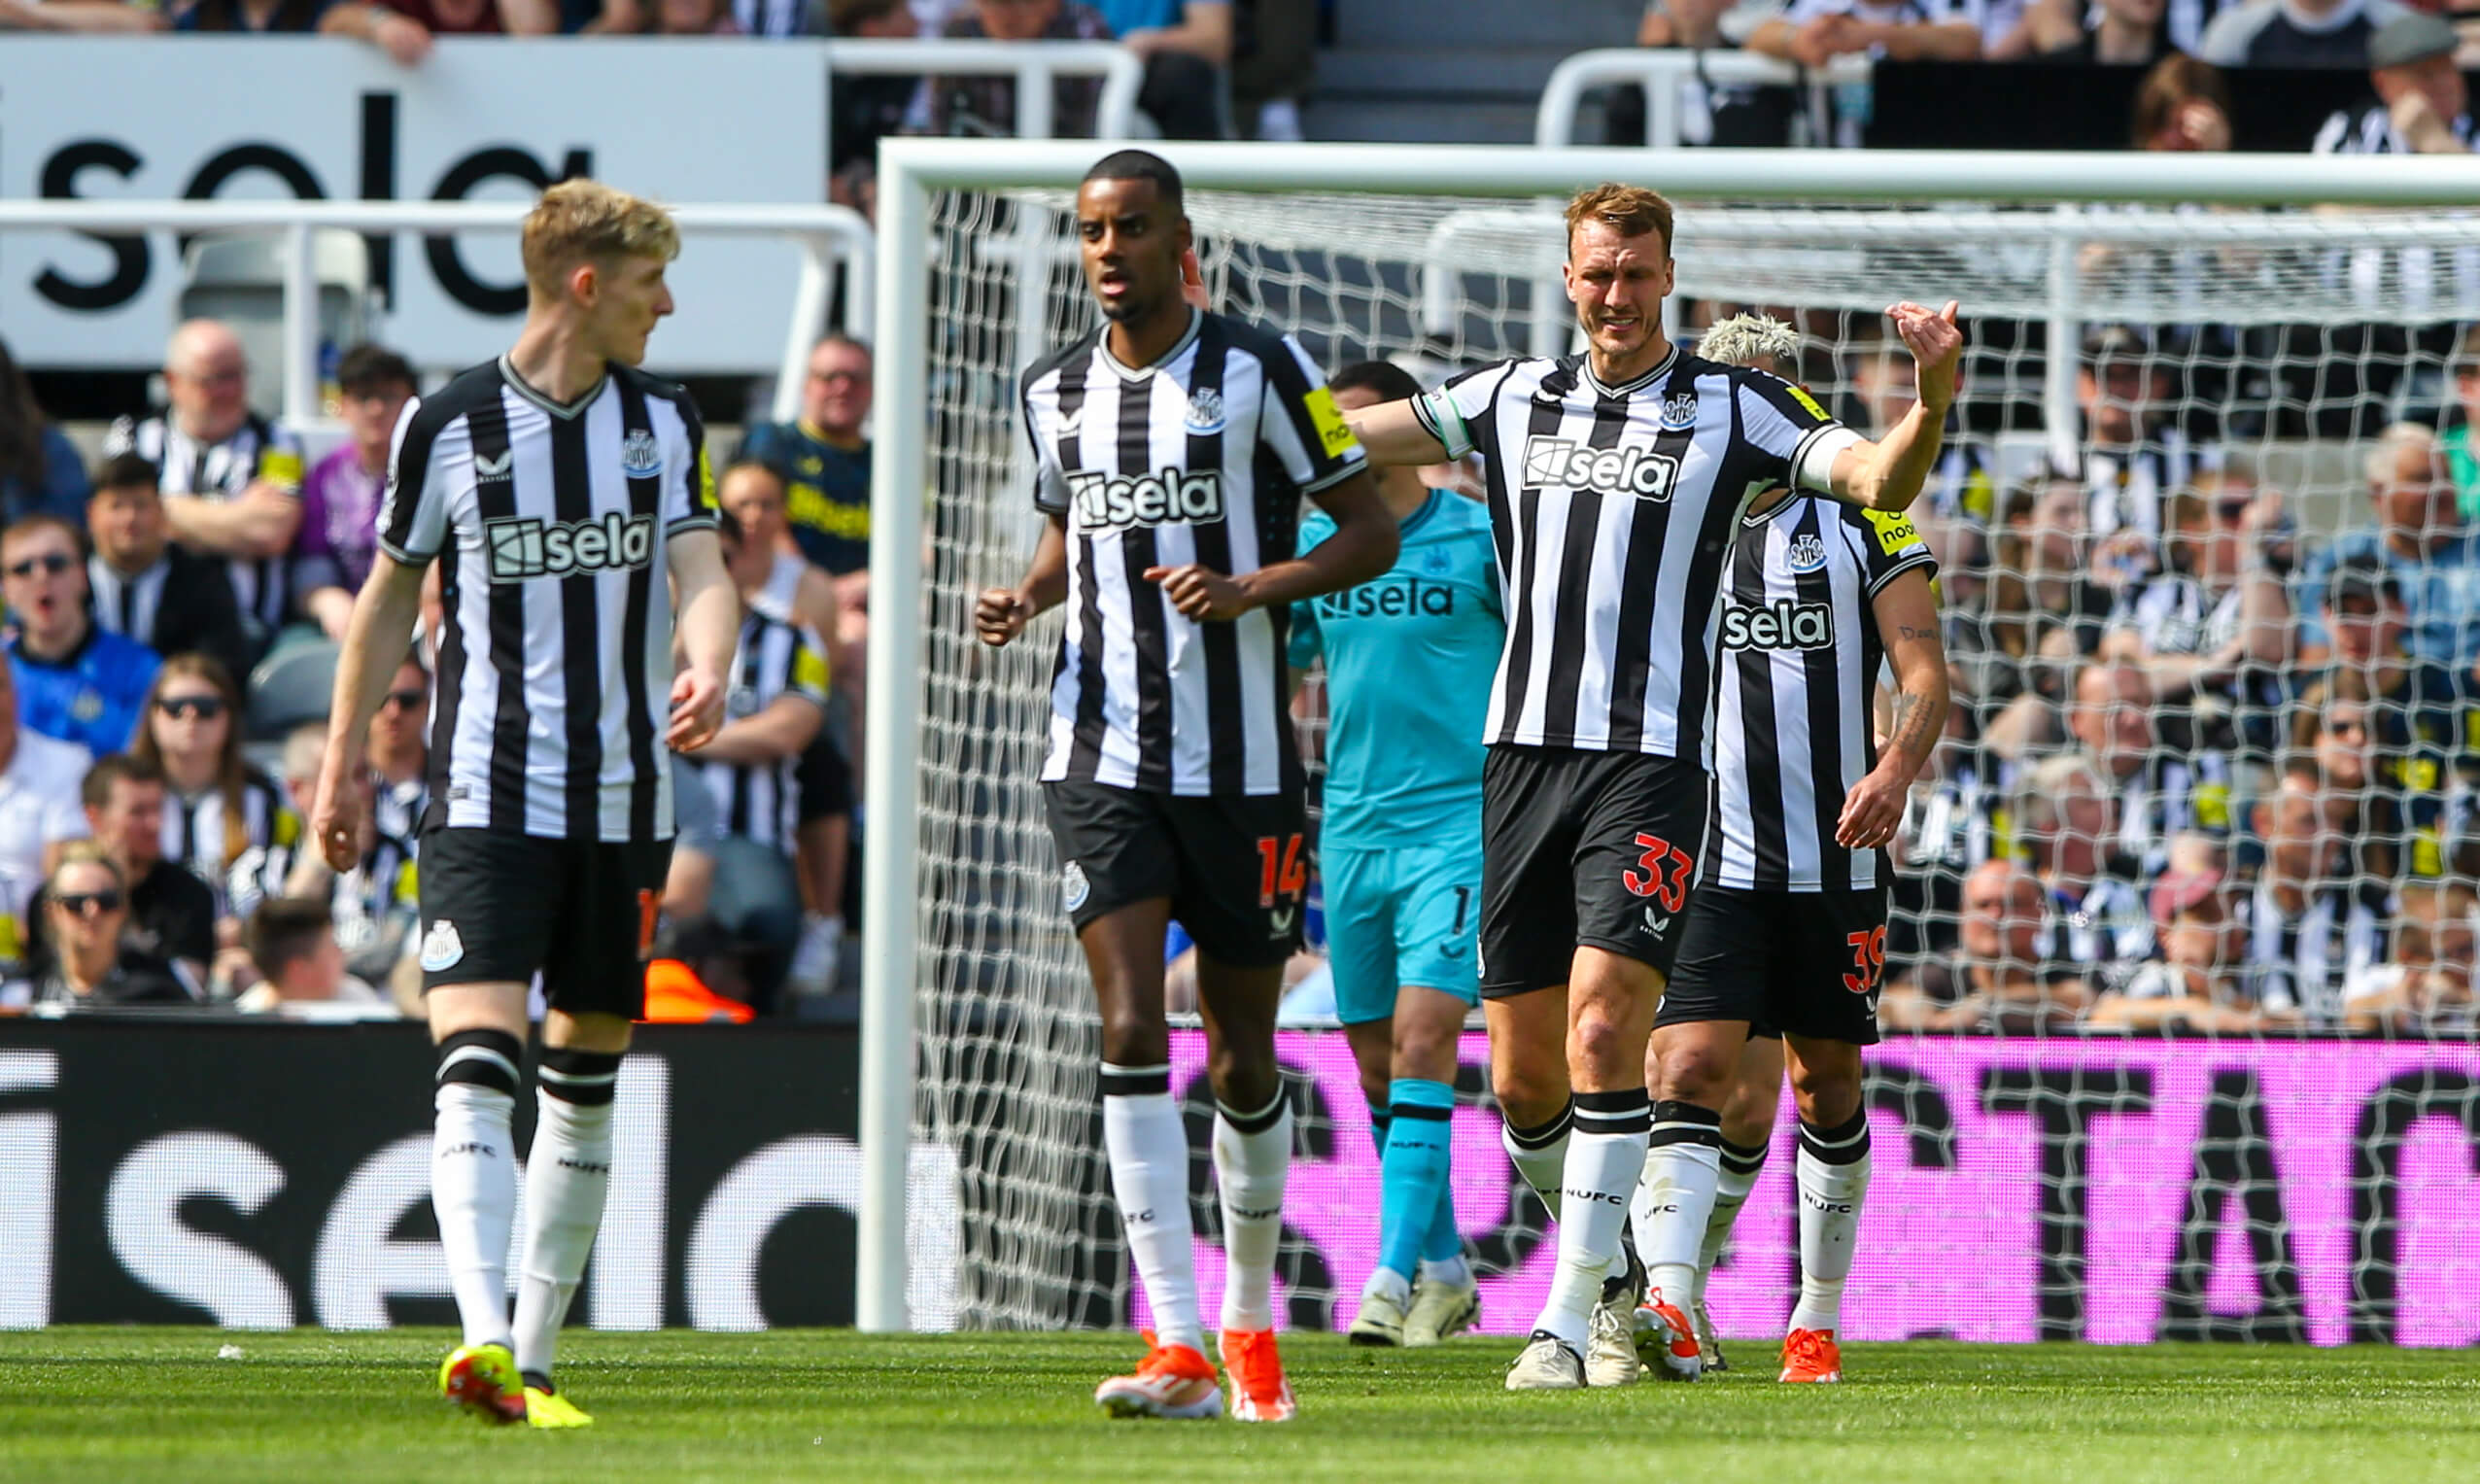 To reach Europe, Newcastle must overturn a season of mediocrity on the road